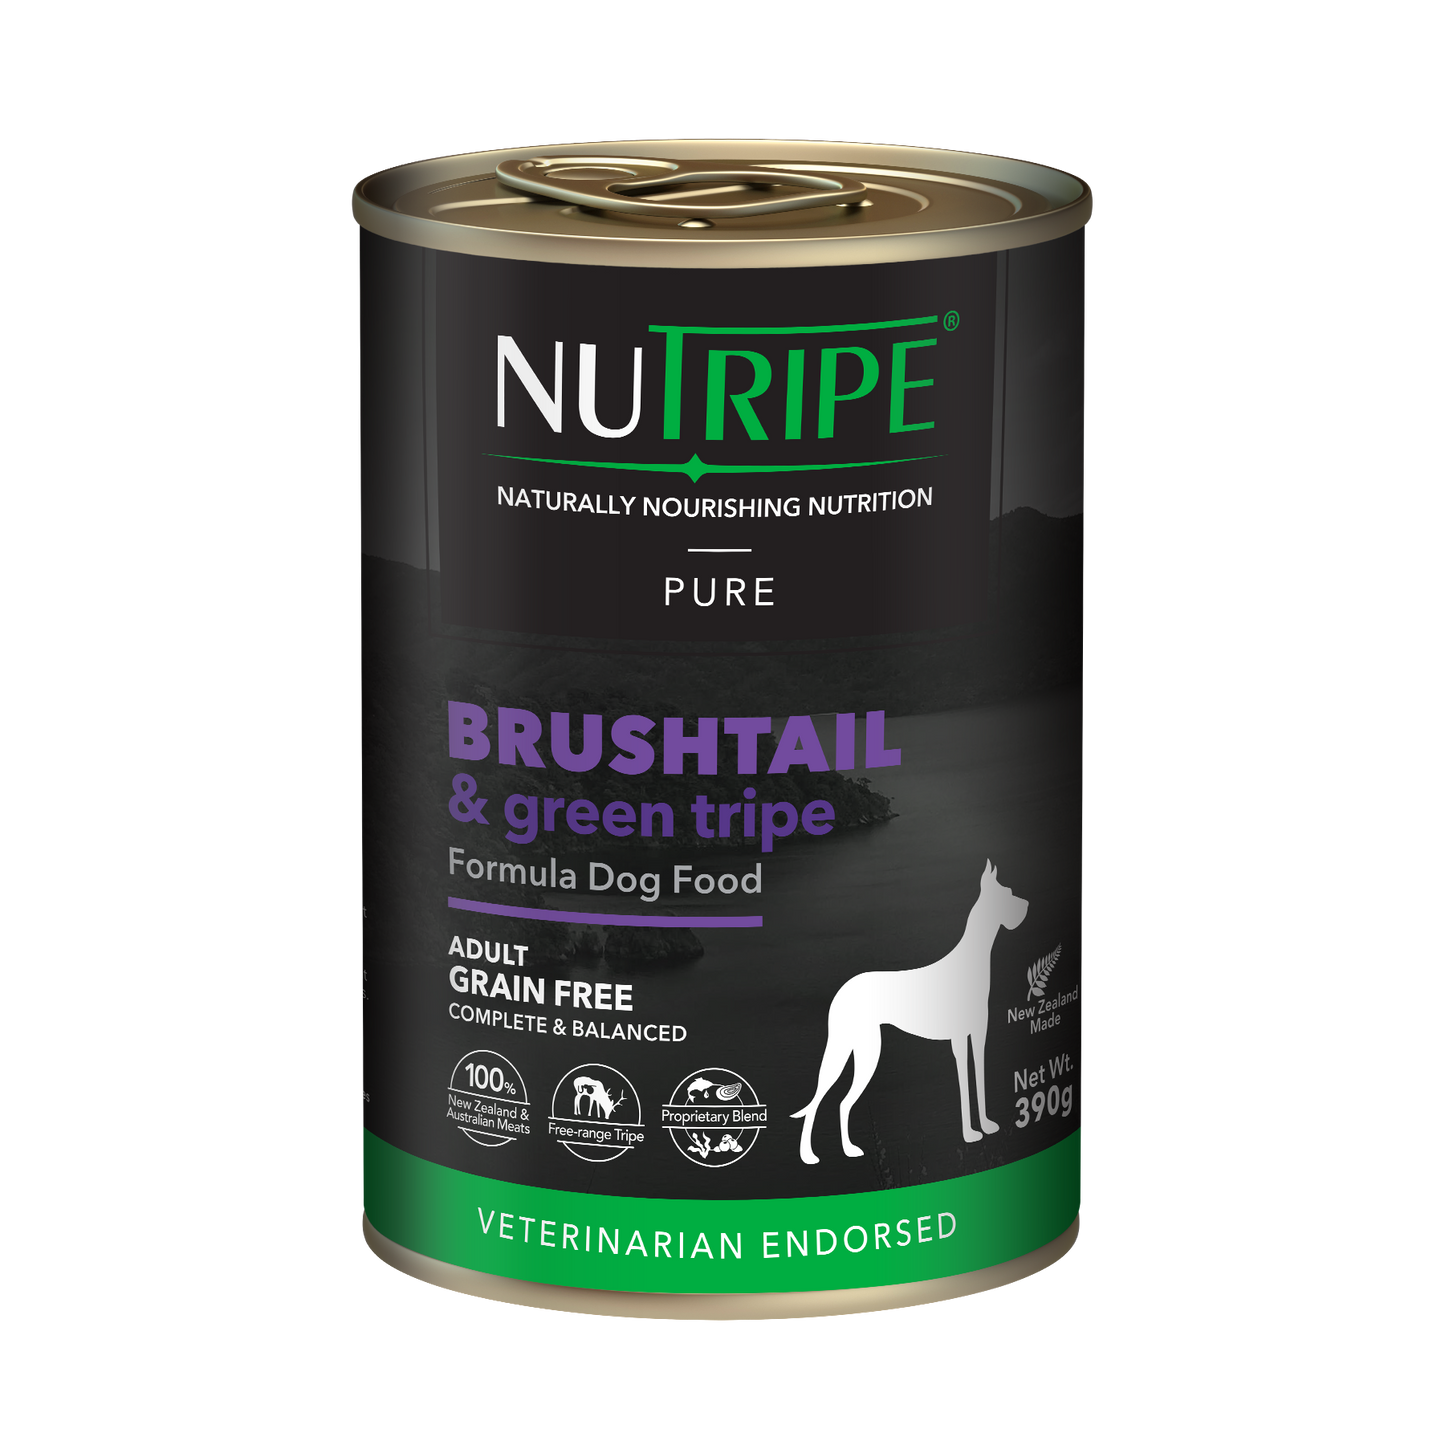 Nutripe Pure Brushtail & Green Tripe Adult Dog Canned Food 95g & 390g